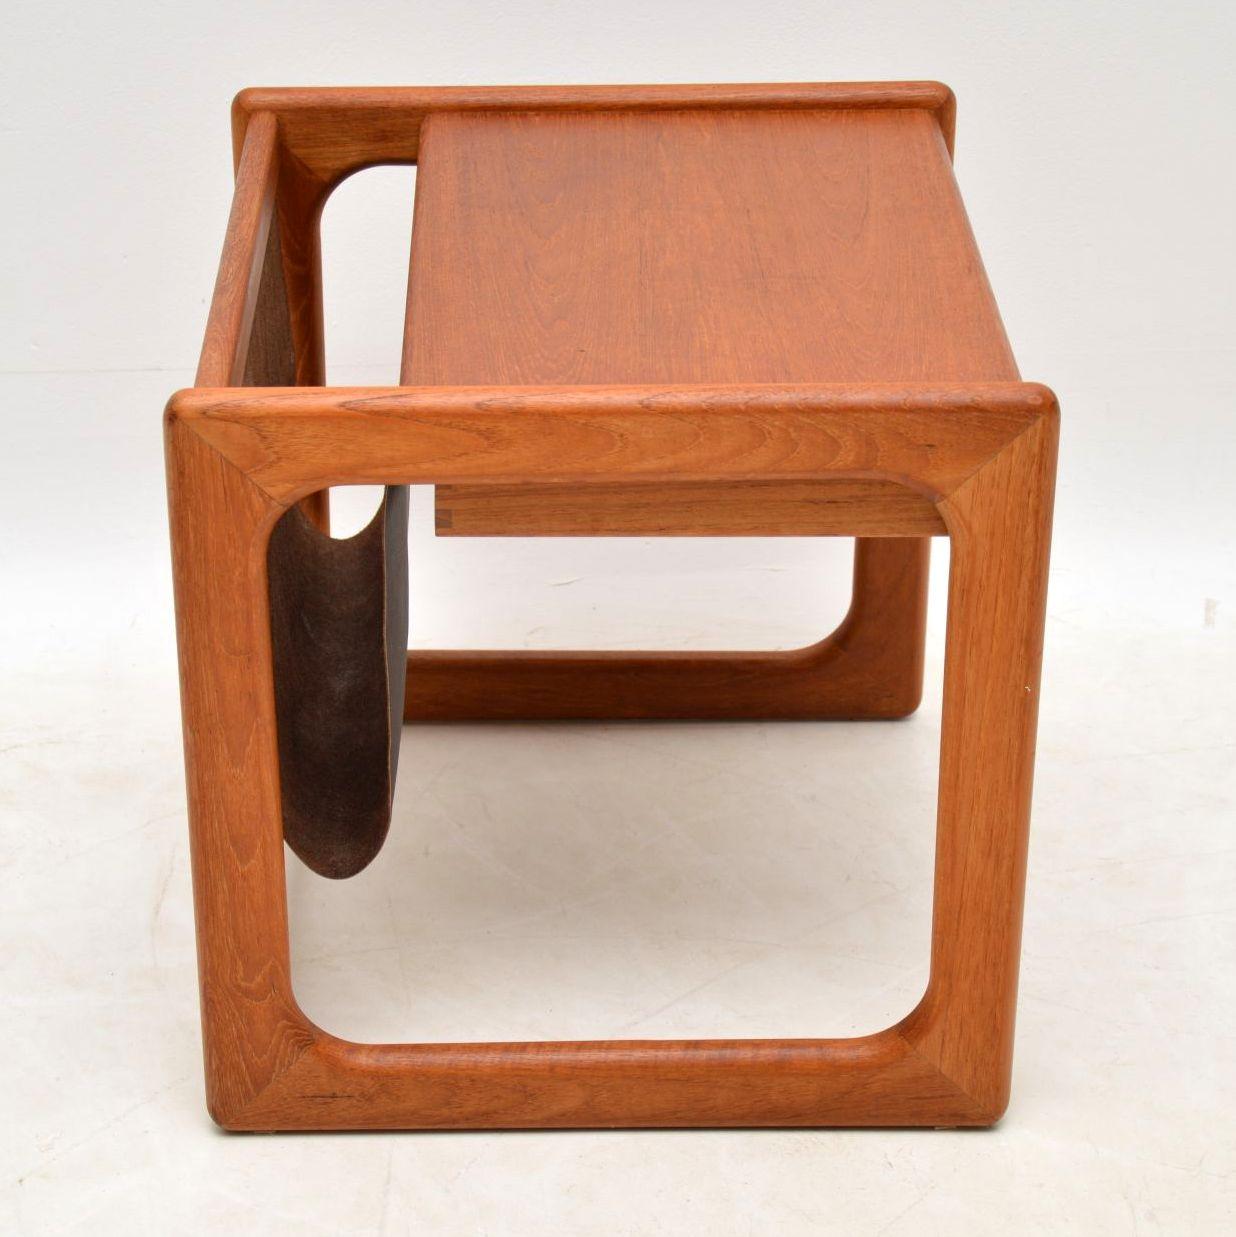 A stylish and top quality vintage Danish side table in teak, with a built in leather magazine rack, it dates from the 1960s-1970s. This is really well made, and is in great condition for its age, with only some extremely minor wear here and